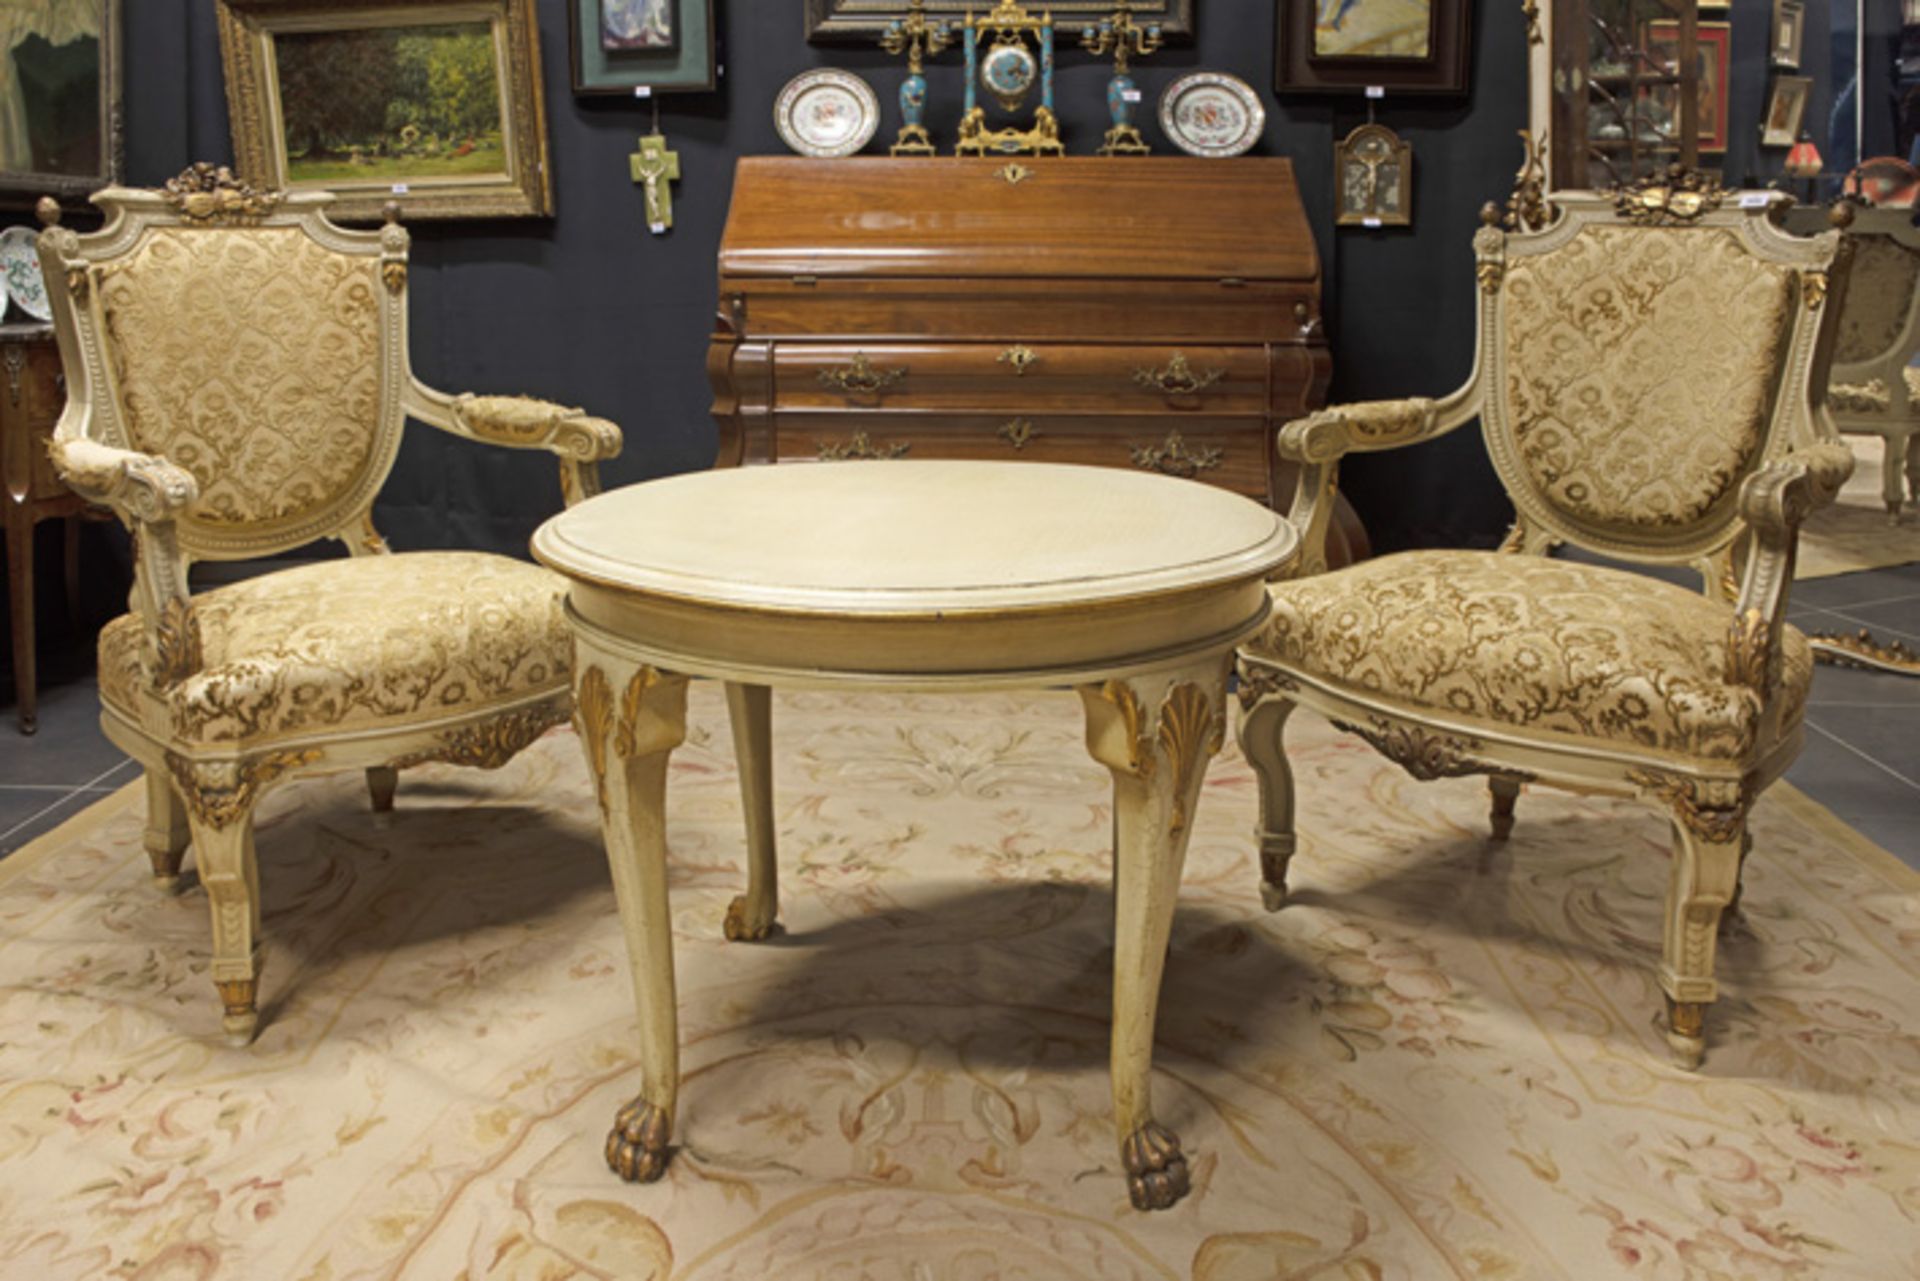 pair of 19th Cent. neoclassical Napoleon III armchairs in polychromed wood sold with a round